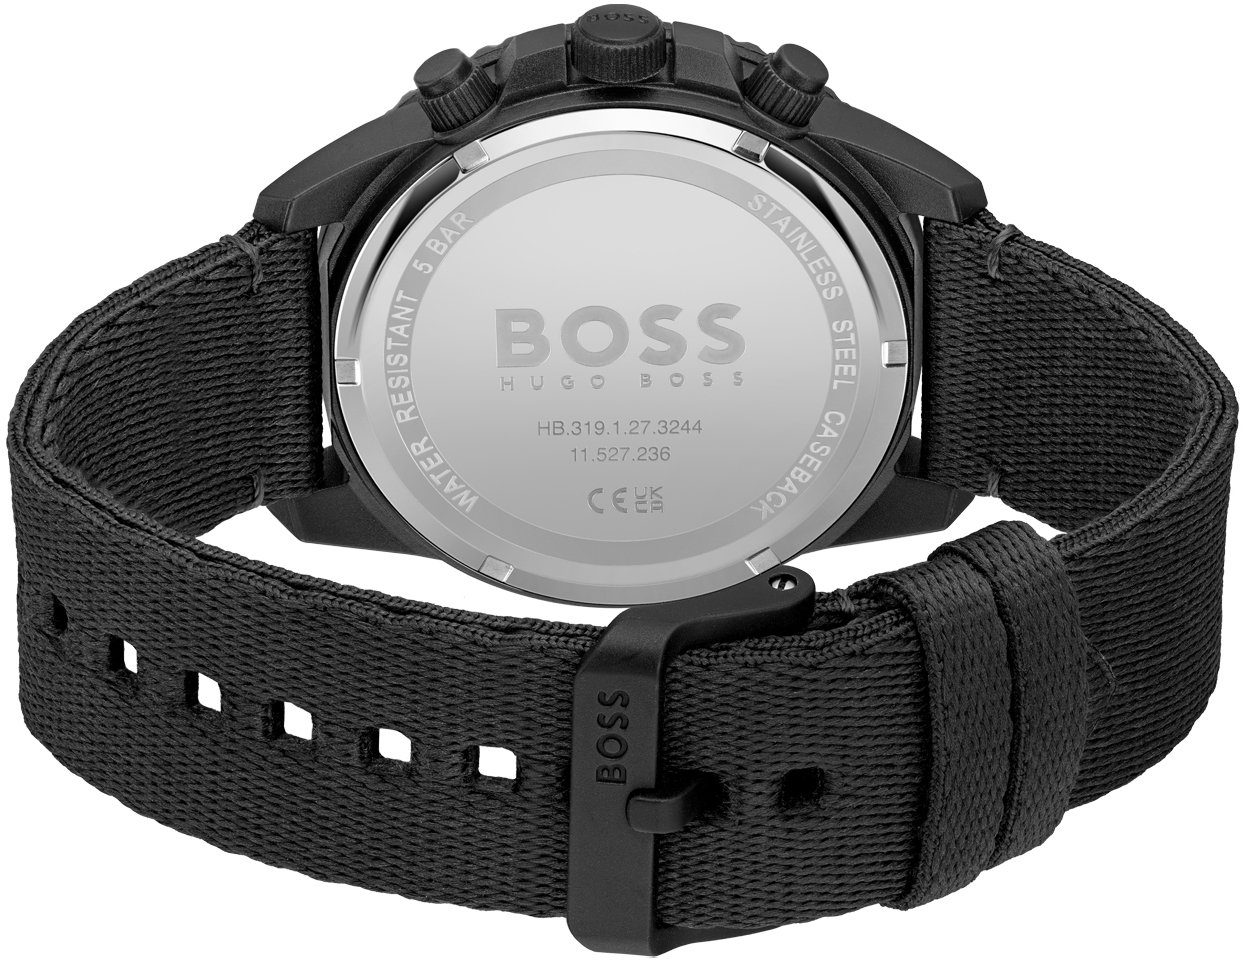 Admiral Chronograph Sustainable #tide, 1513918 BOSS